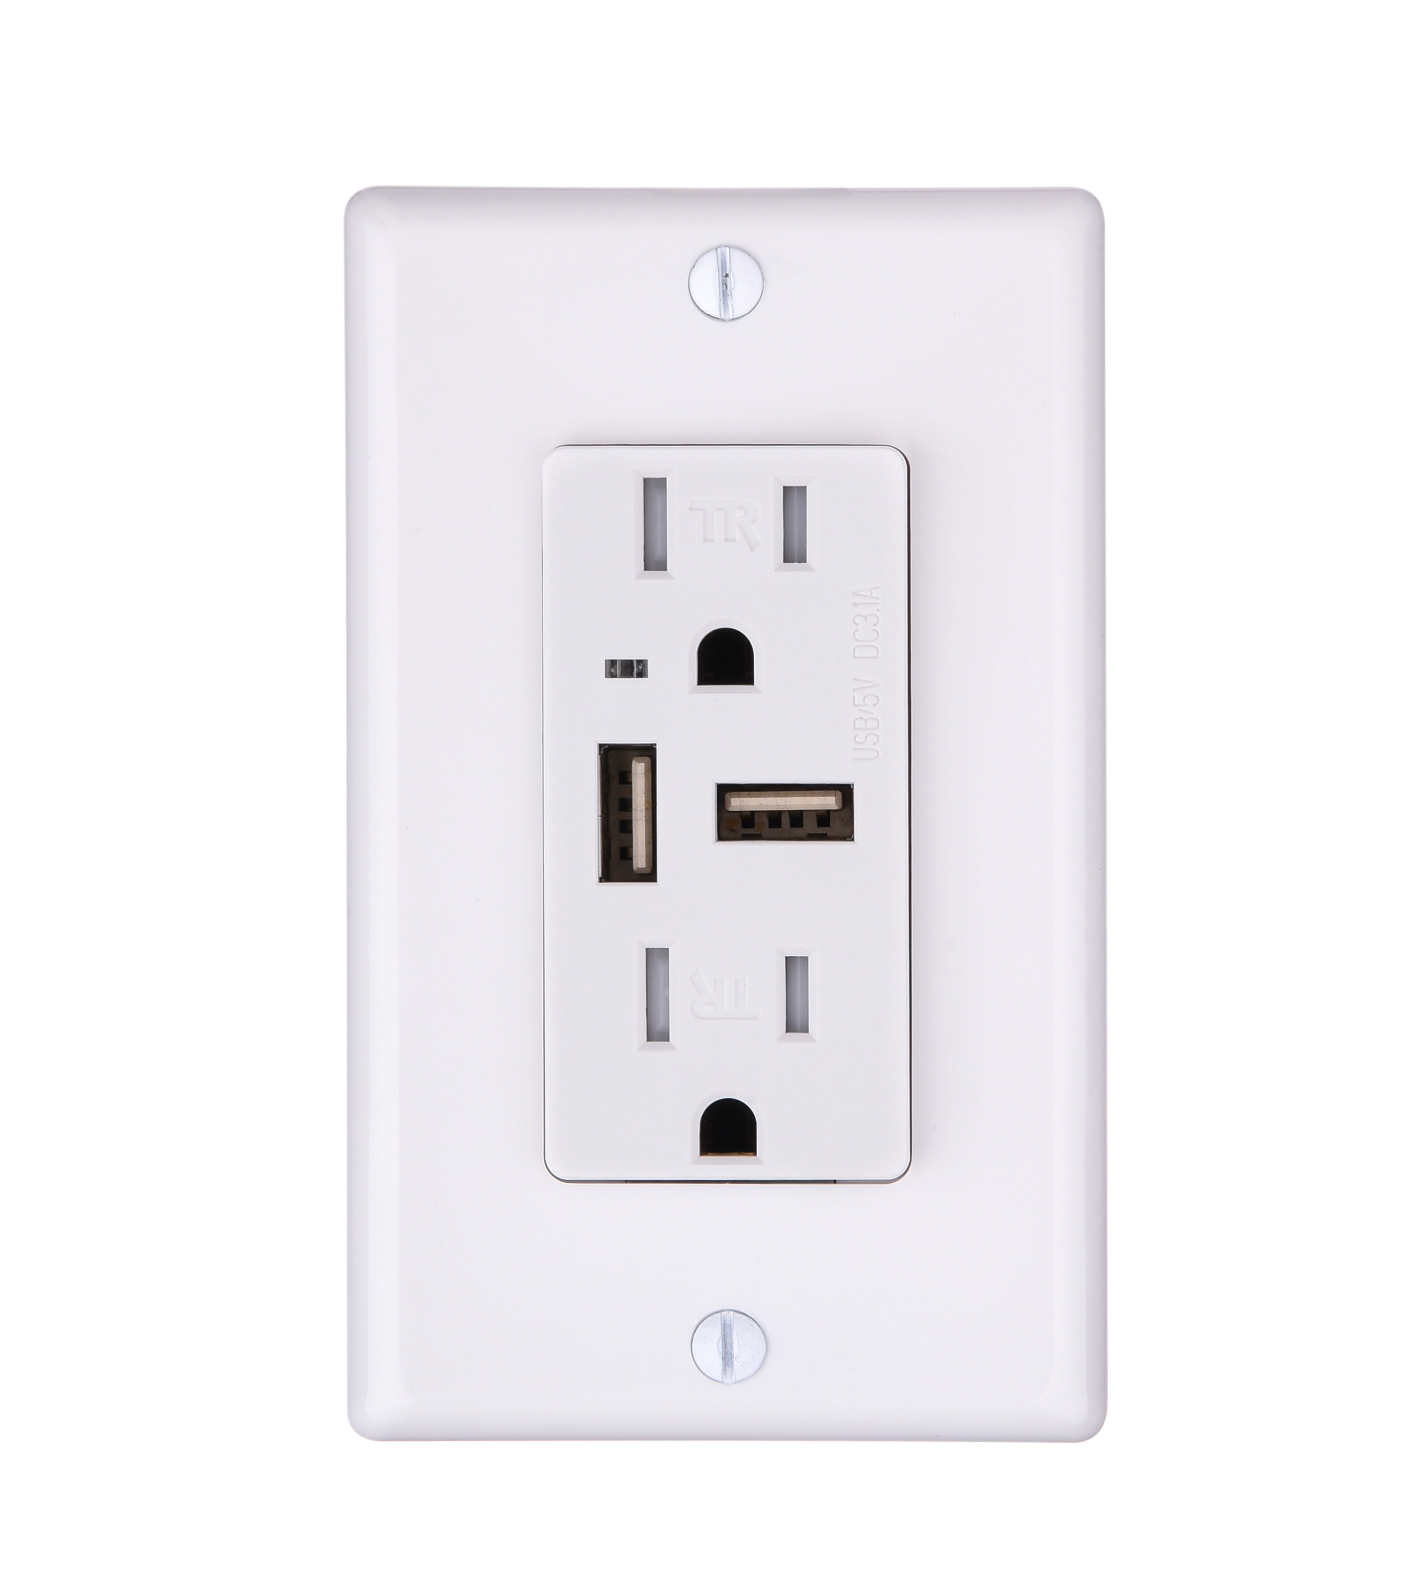 Special Design for Mexico USB Outlets - USB Wall Outlets CZ-05 – Faith Electric